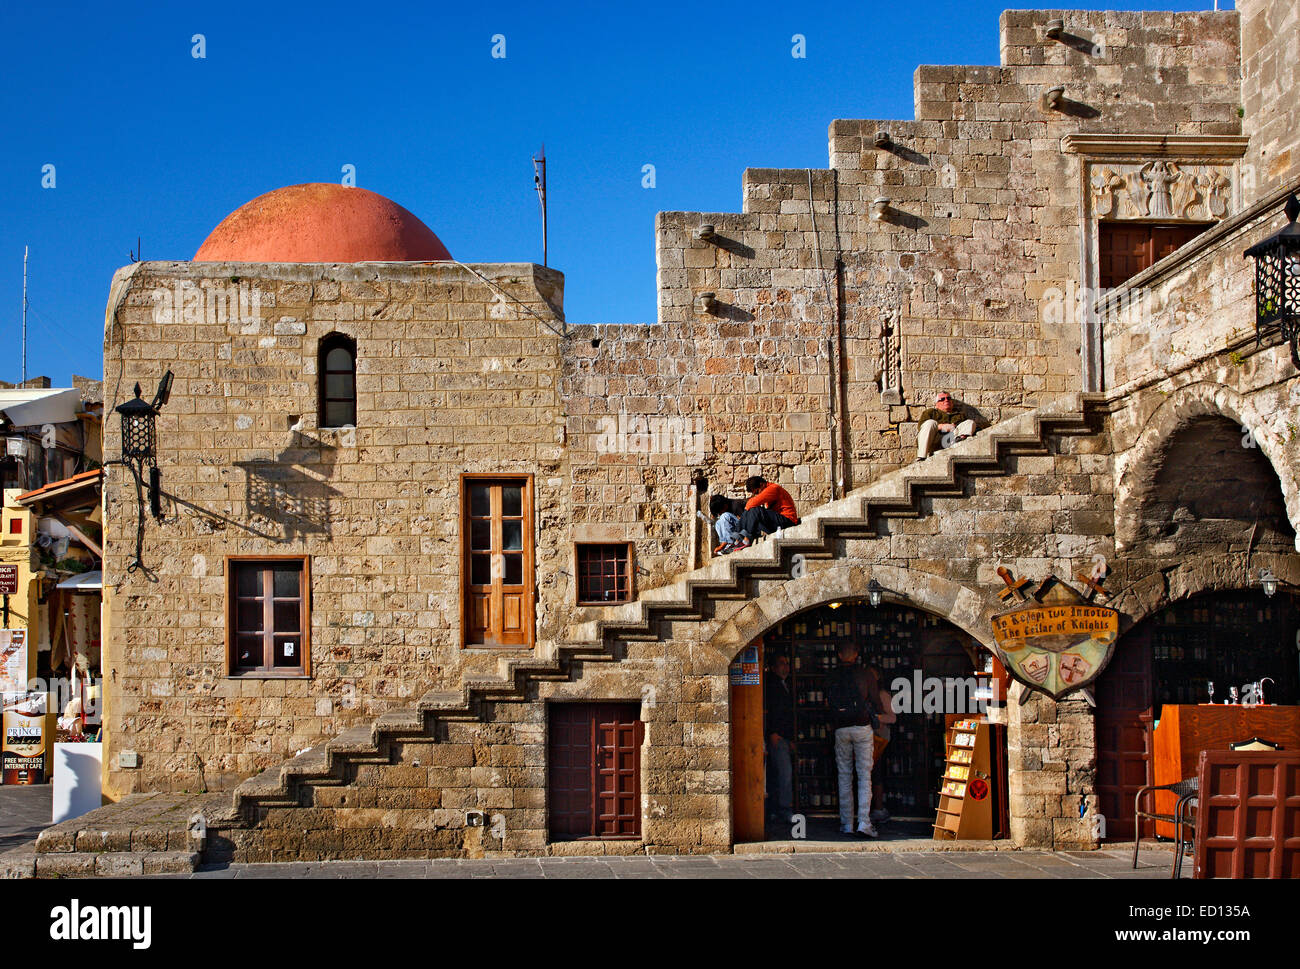 The building of the Castellania, at Ippokratous square ('Syntrivani' = 'fountain'),  Medieval town of Rhodes island, Greece. Stock Photo